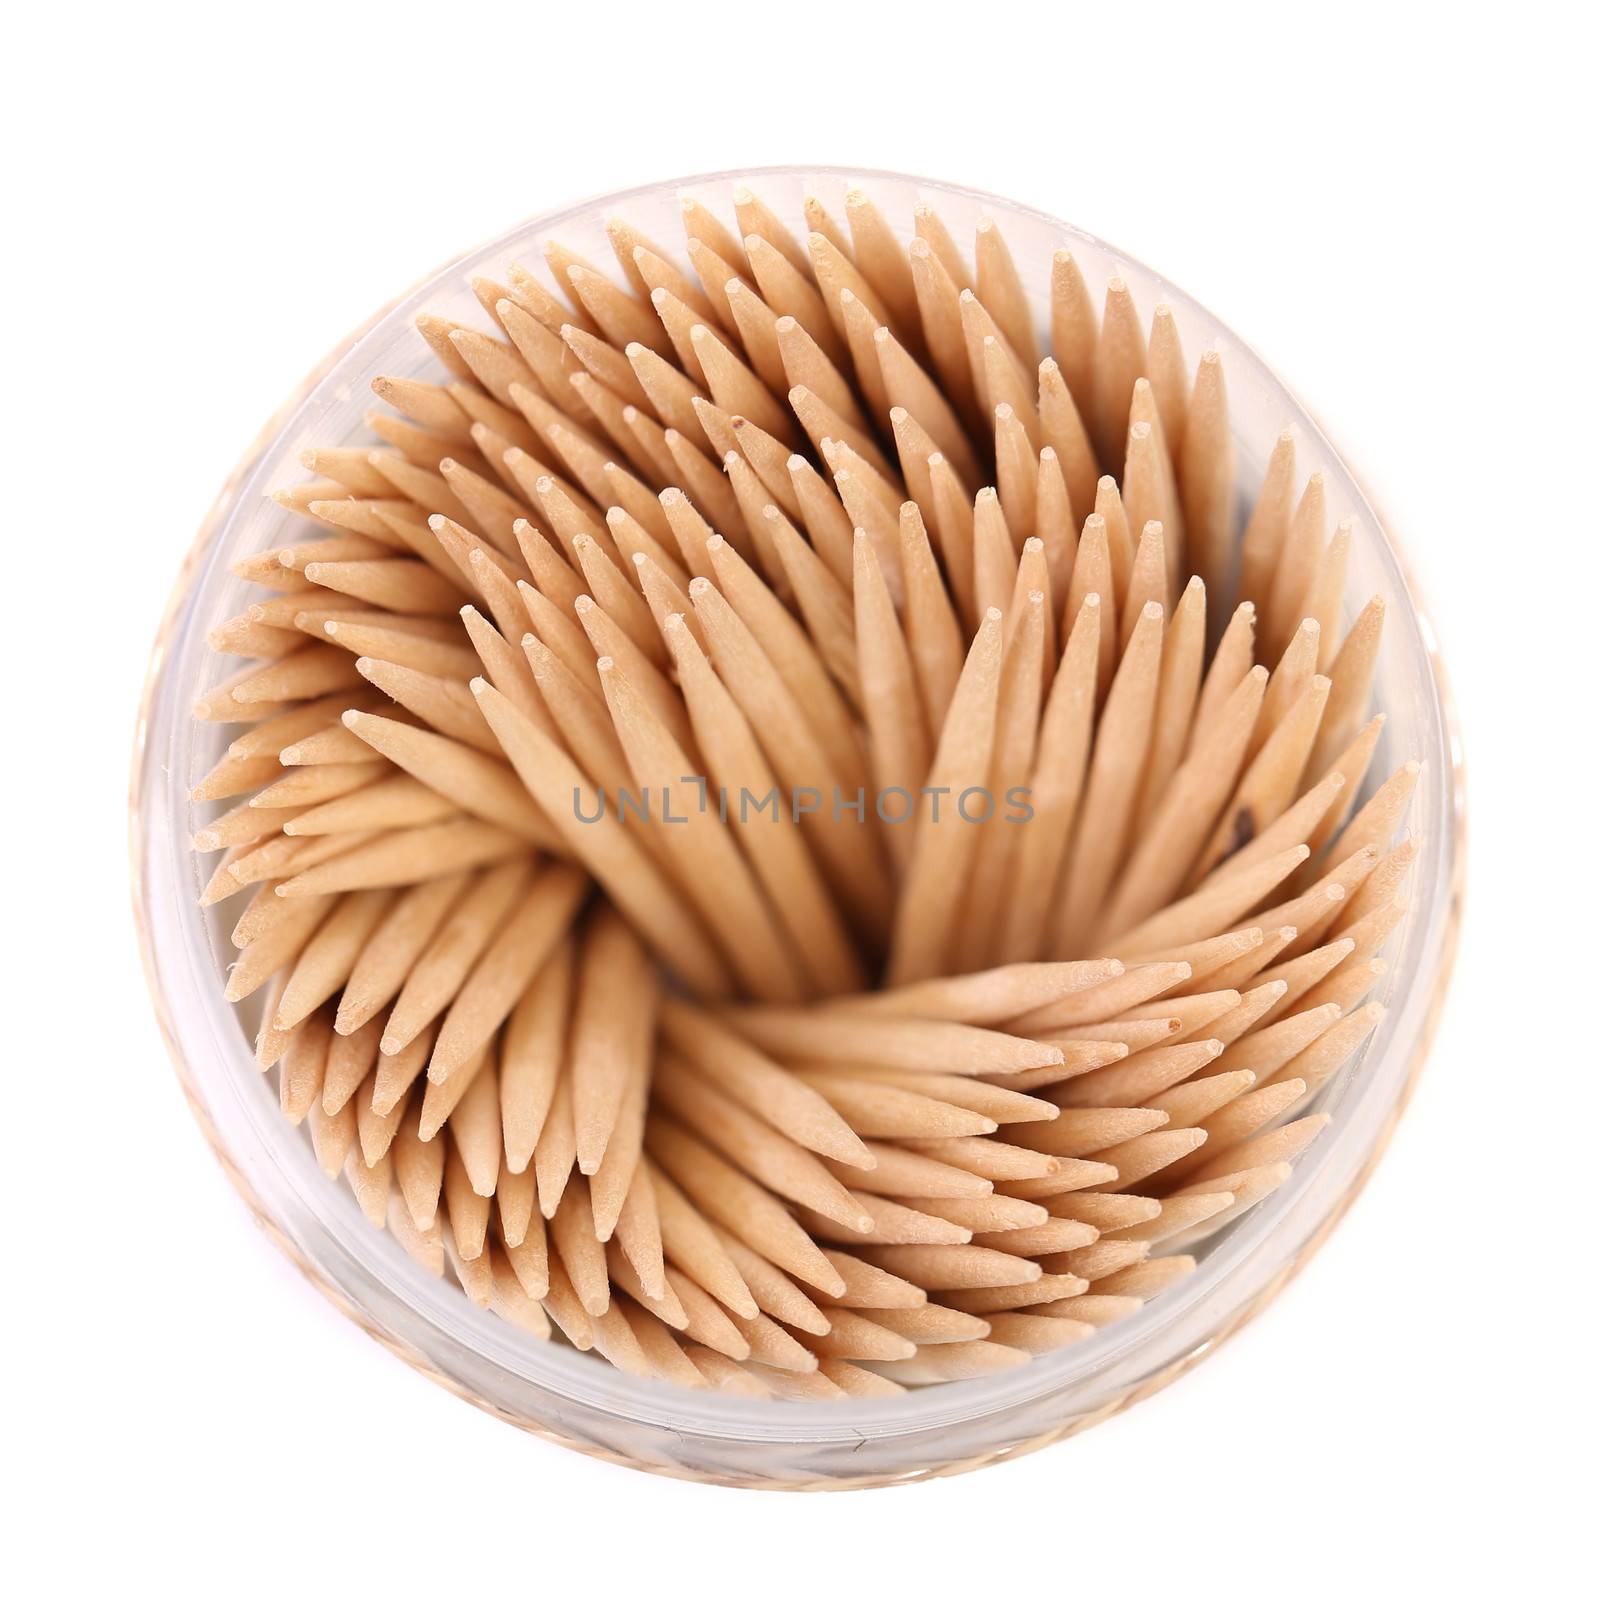 toothpicks in a round box, top view by indigolotos